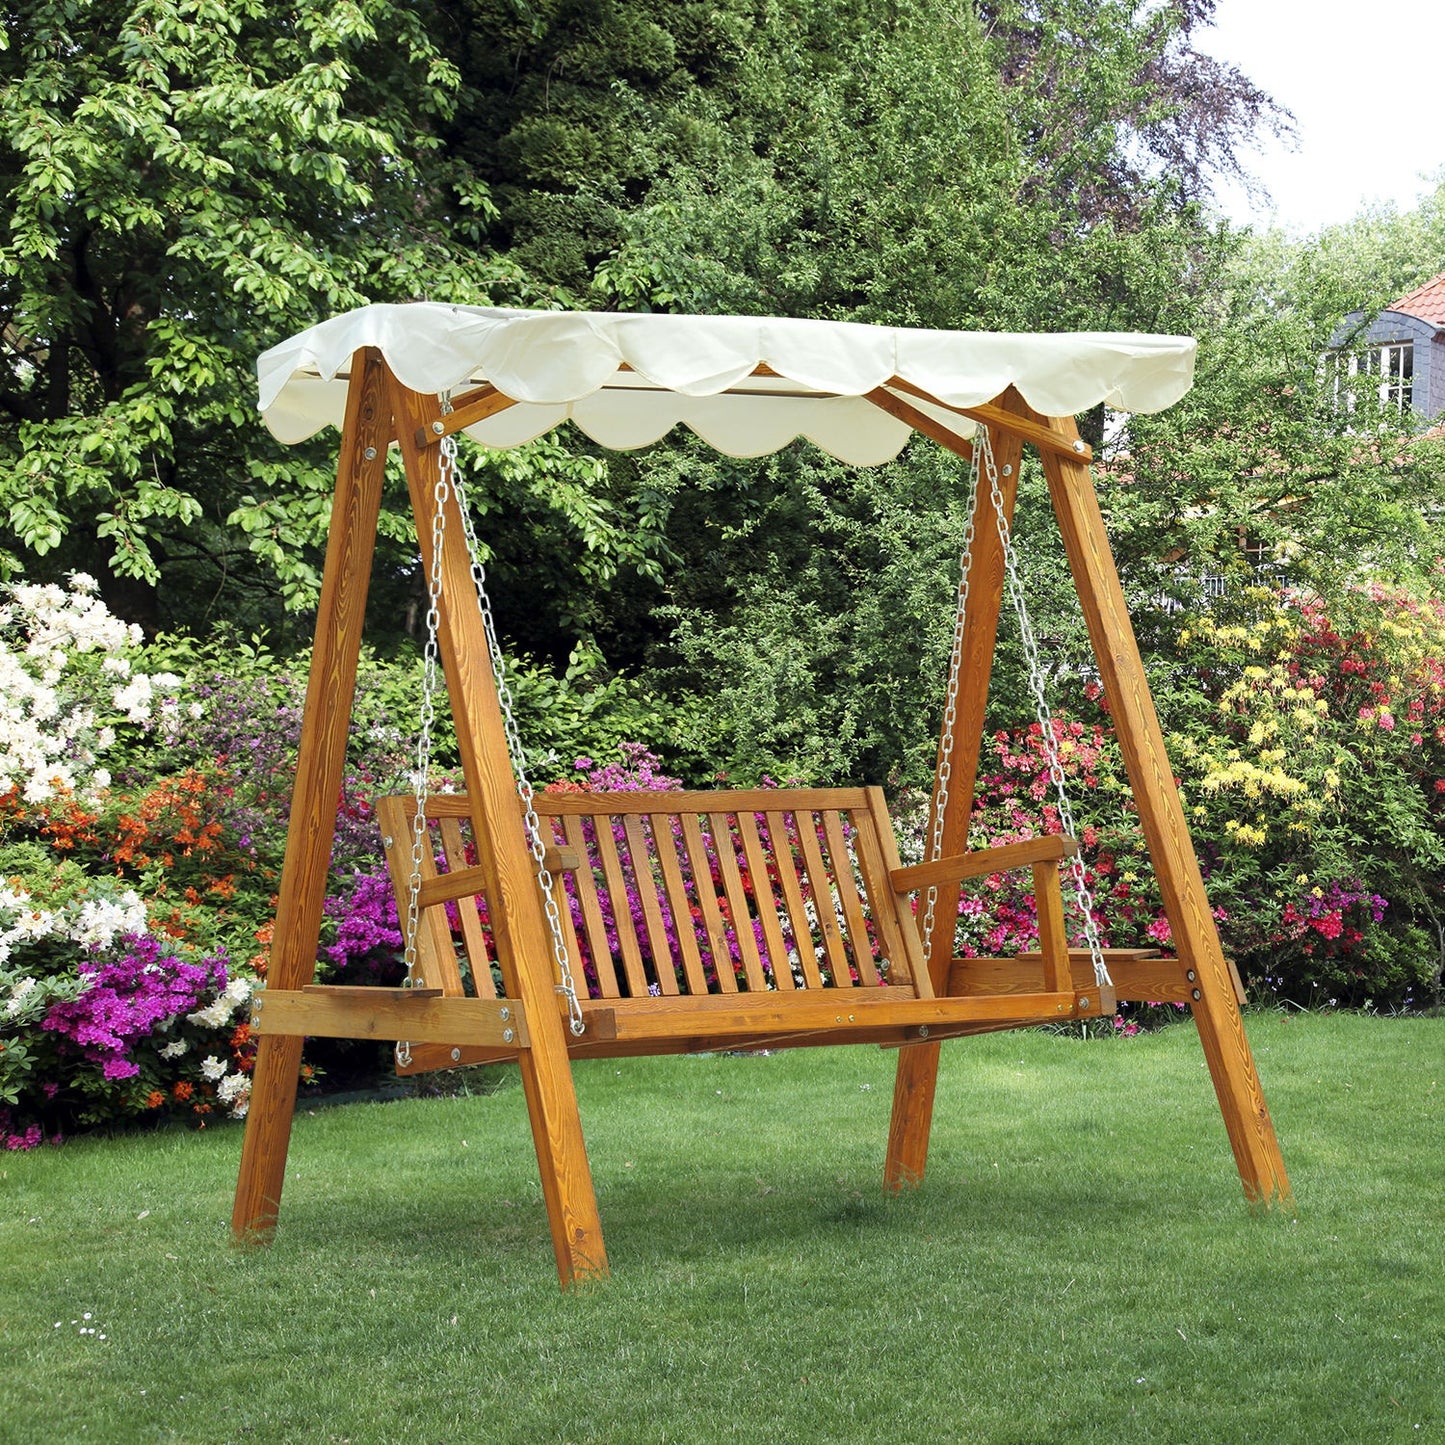 Outsunny 2-Seater Wooden Garden Chair Hammock Furniture Swing Bench Lounger-Cream